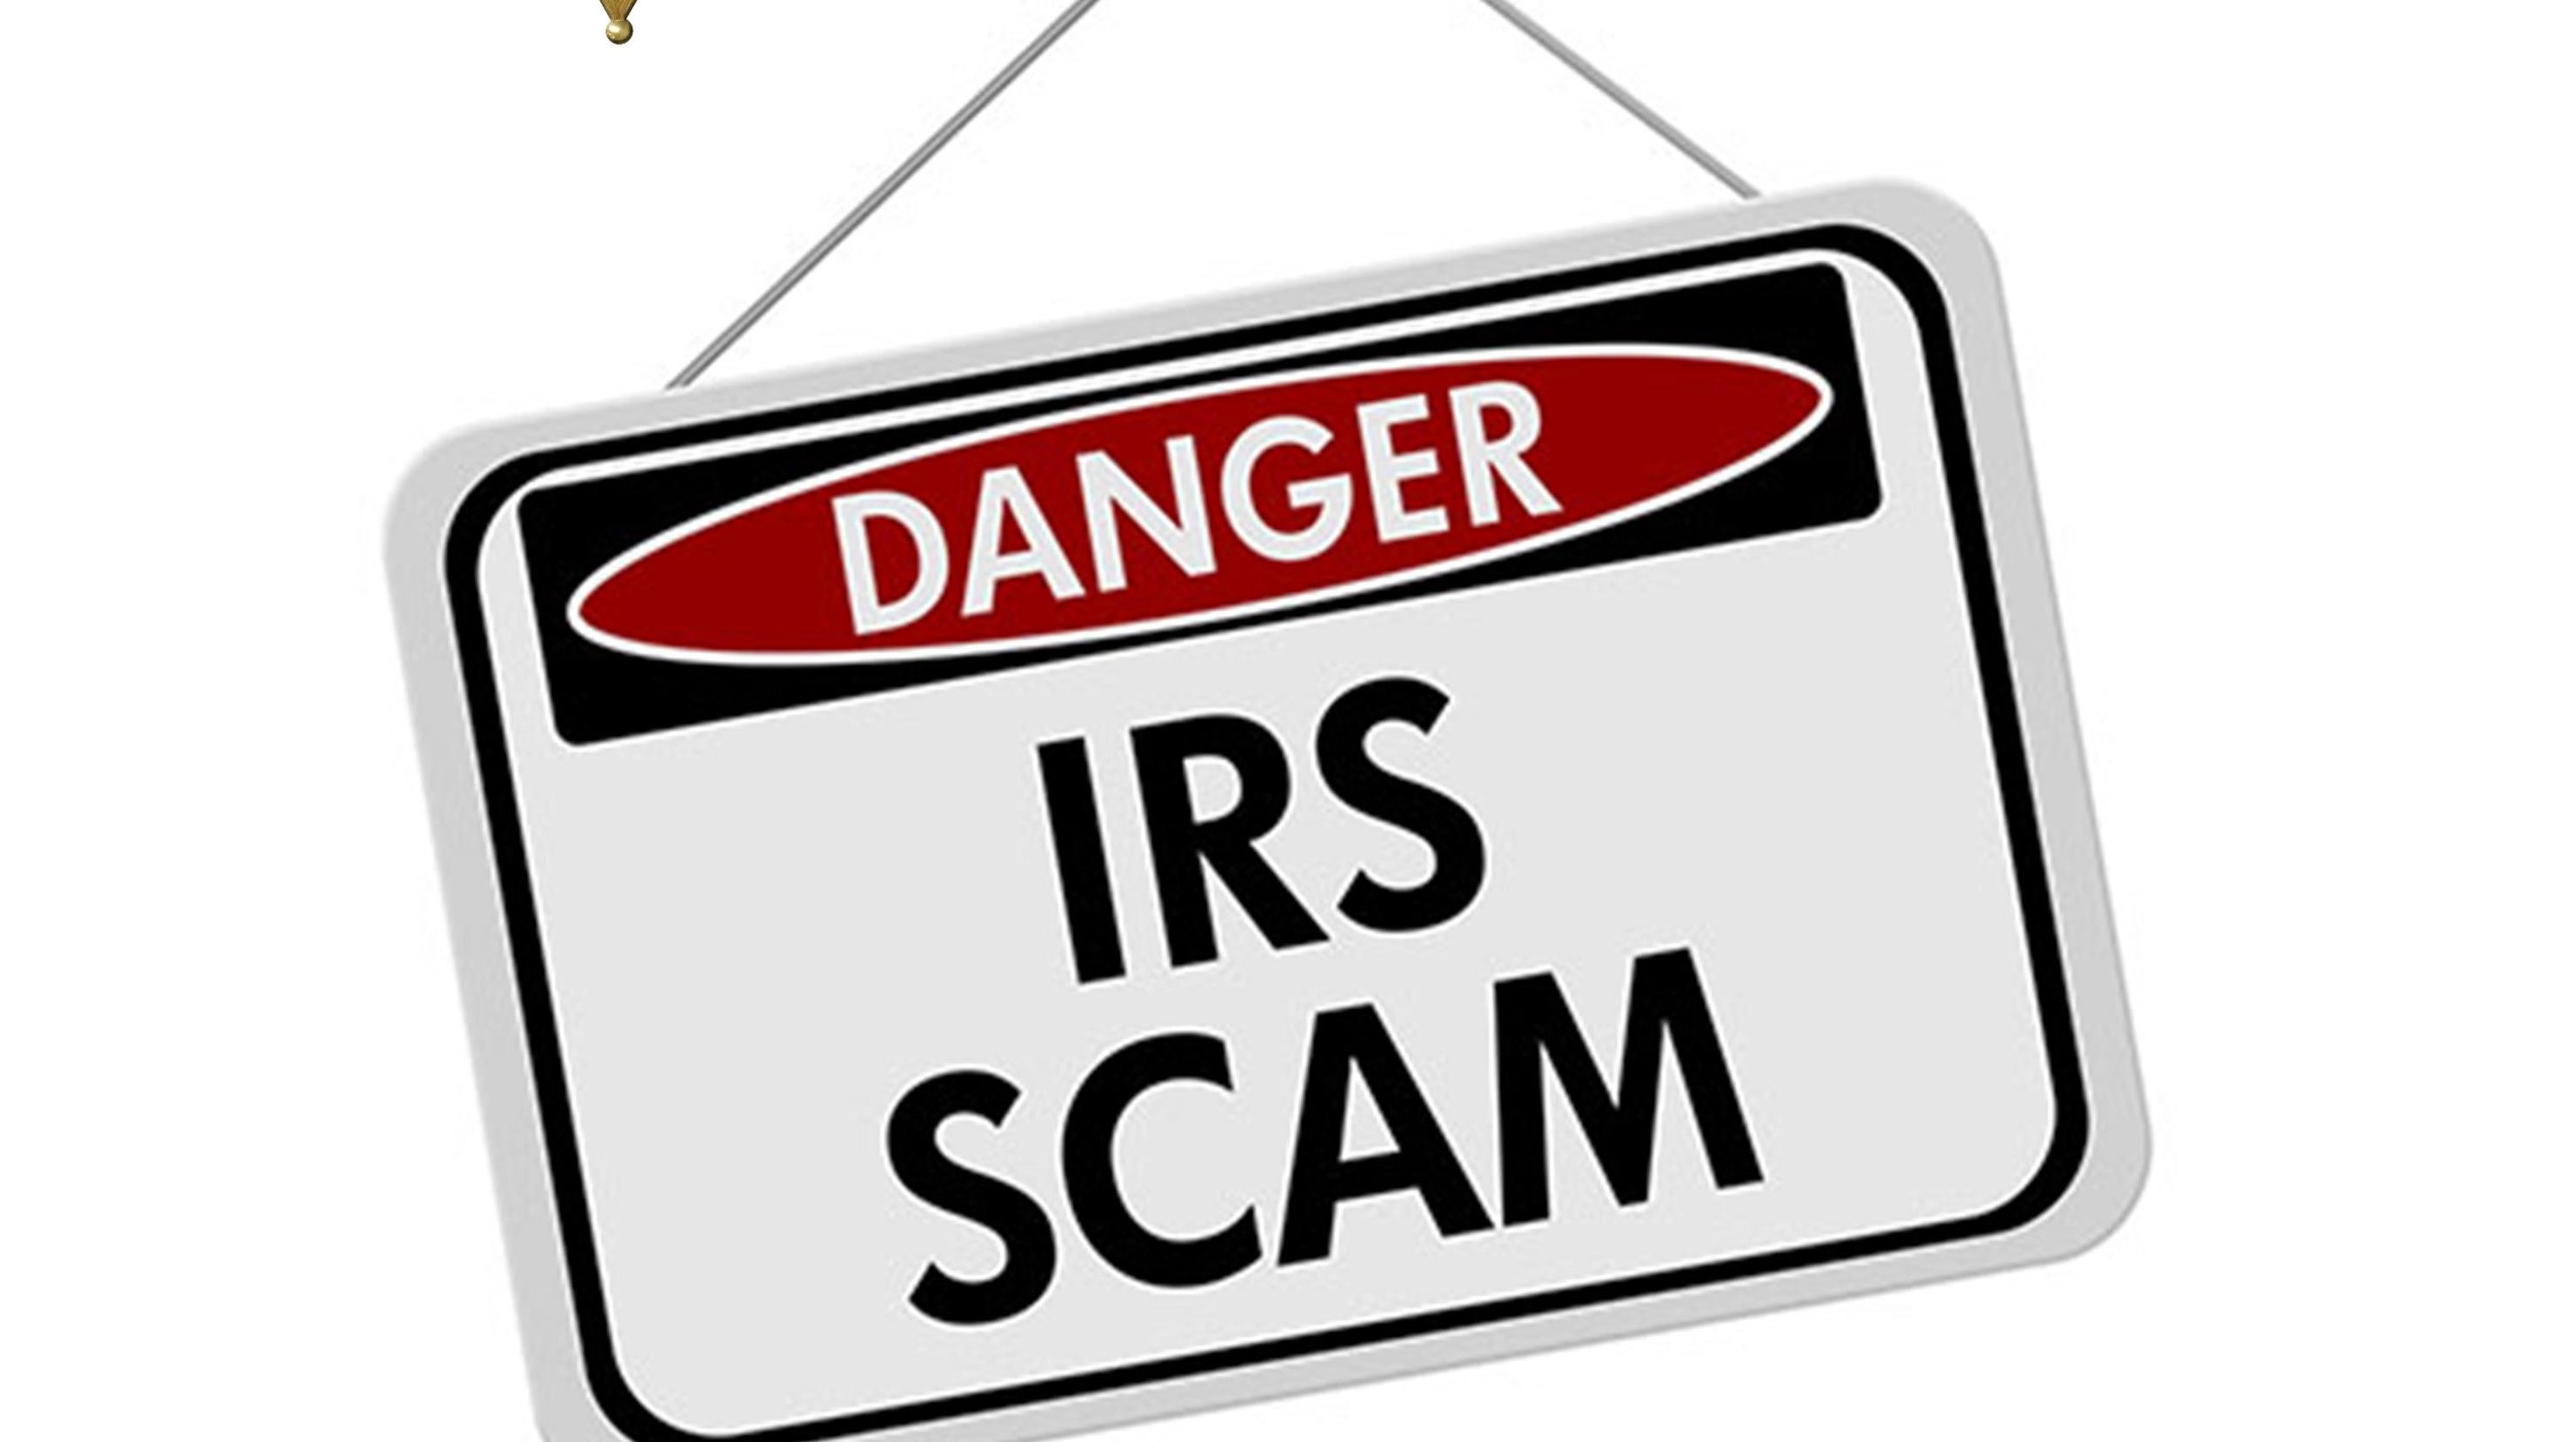 Latest Tax Refund Scam Uses Direct Deposit To Steal From You